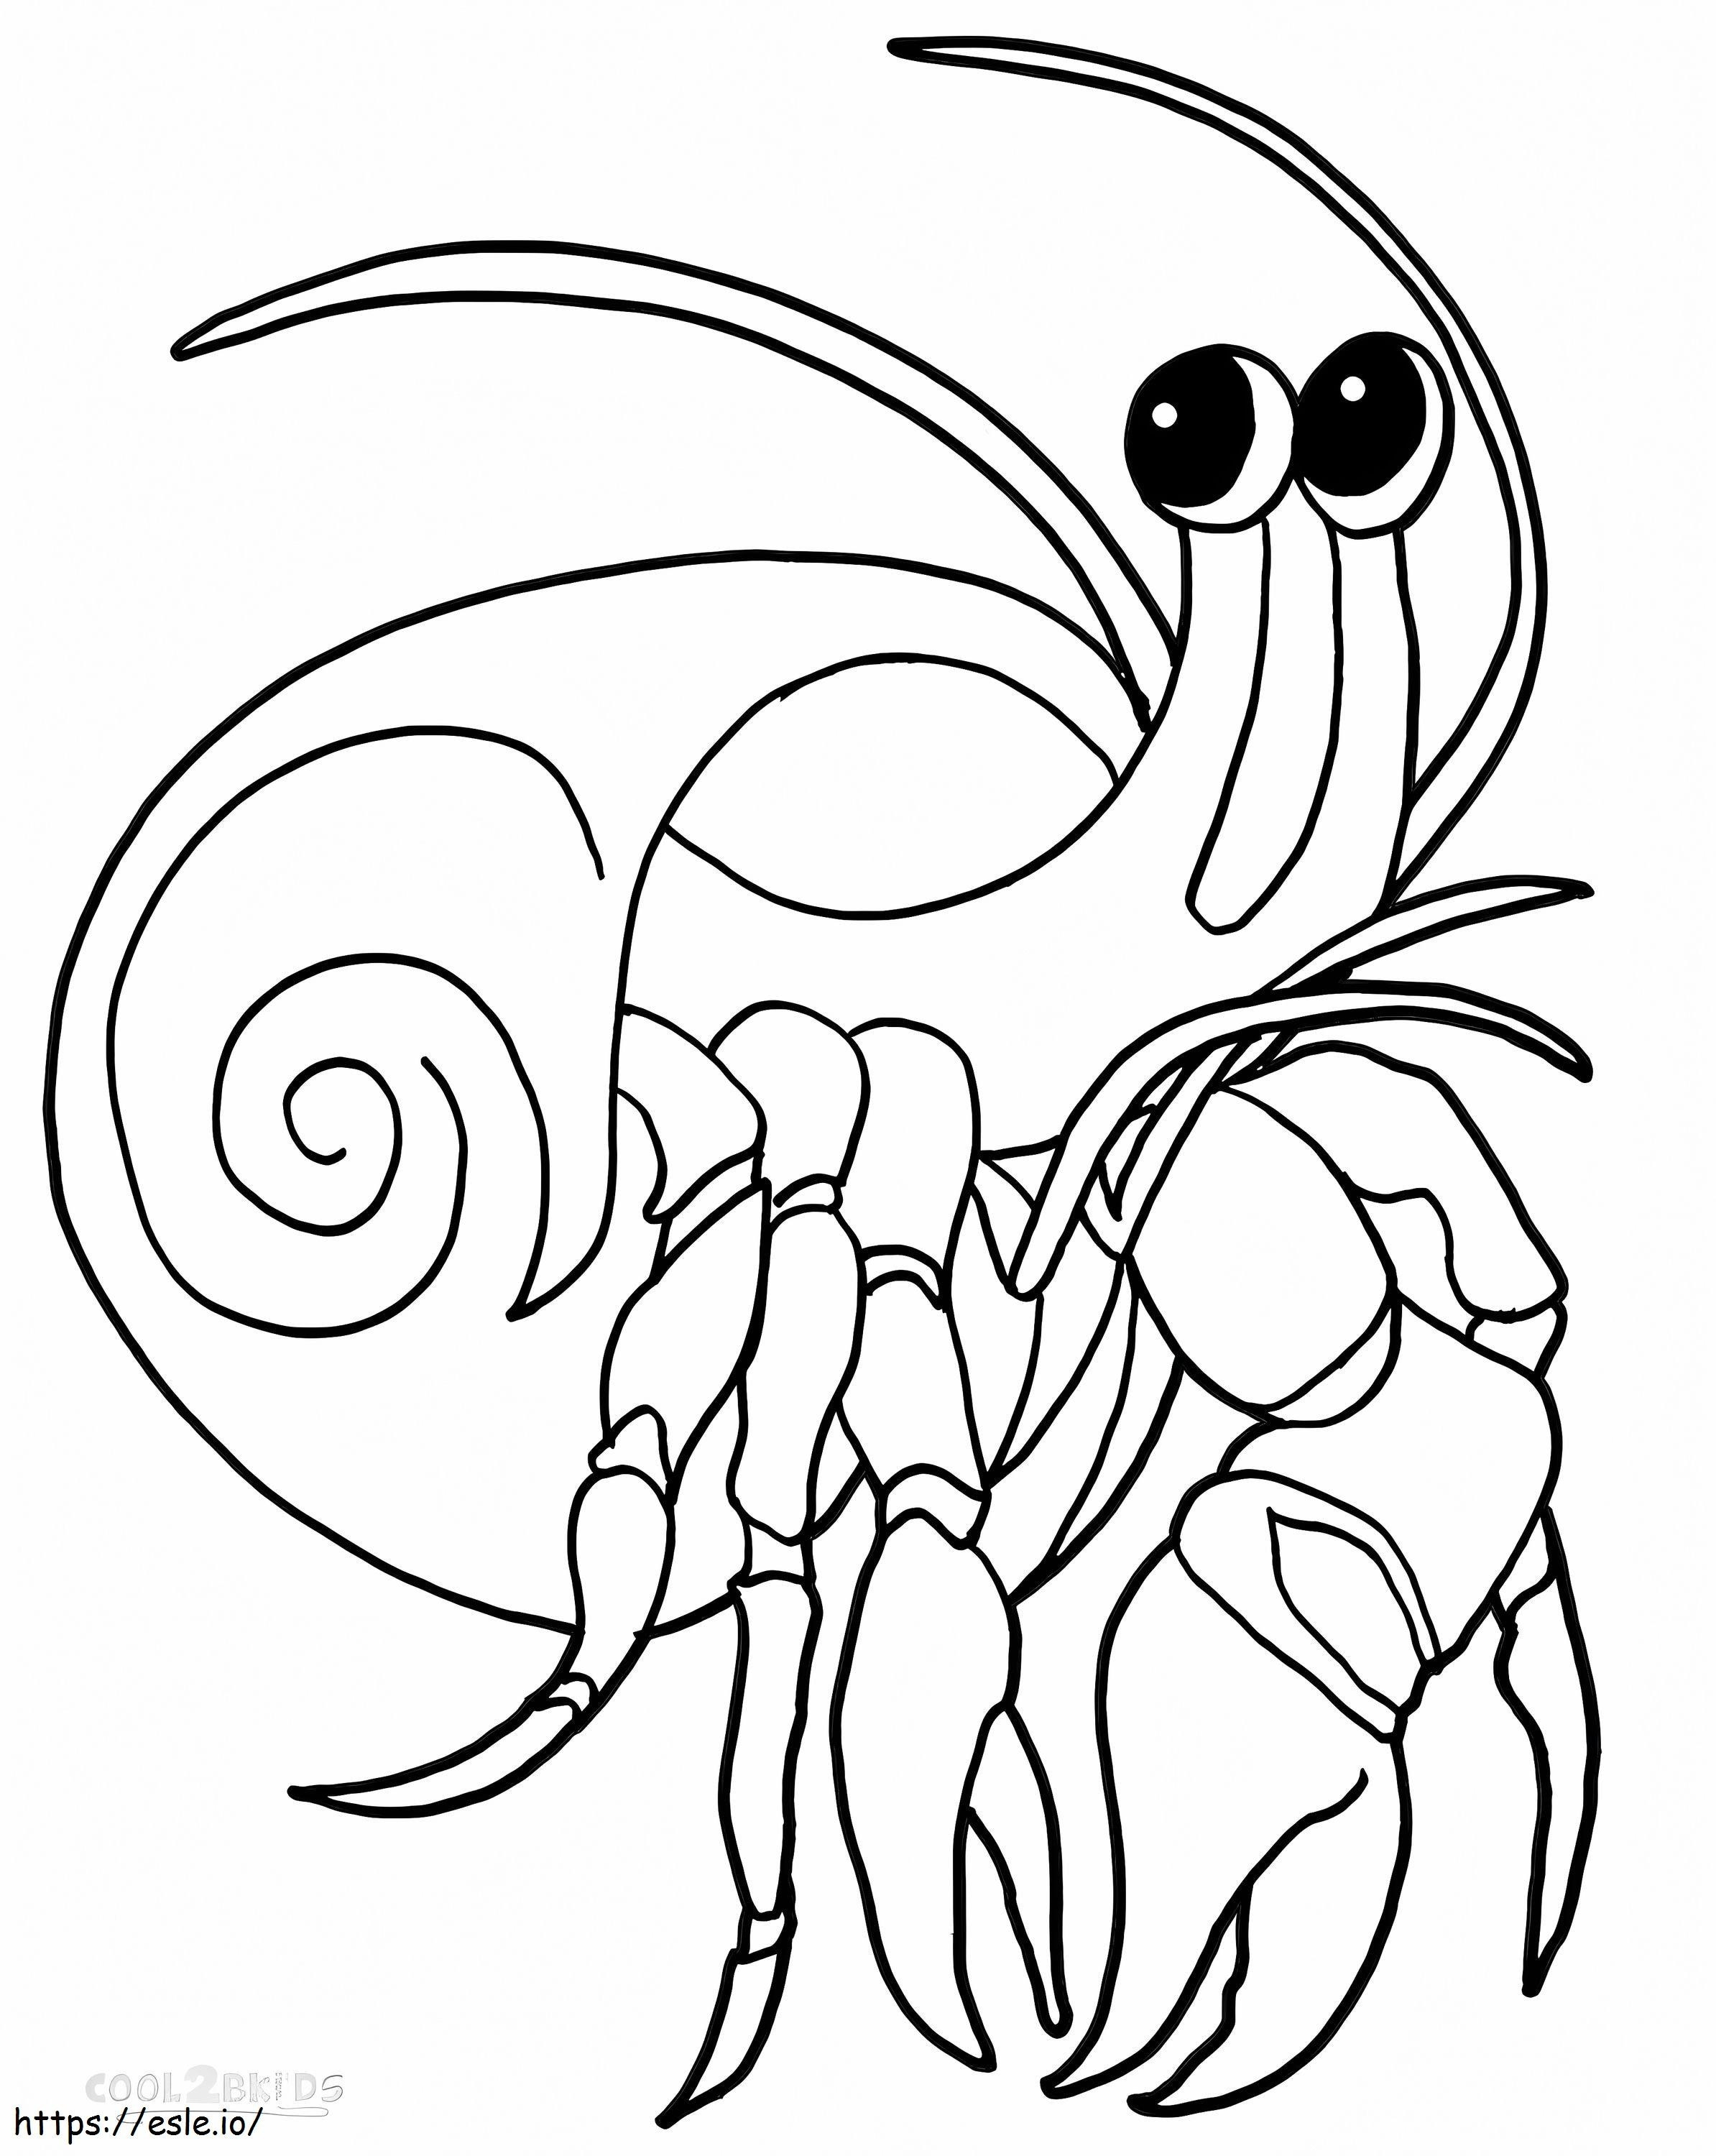 Download Crab Coloring Pictures Printable Hermit Pages For Kids Cool2Bkids coloring page